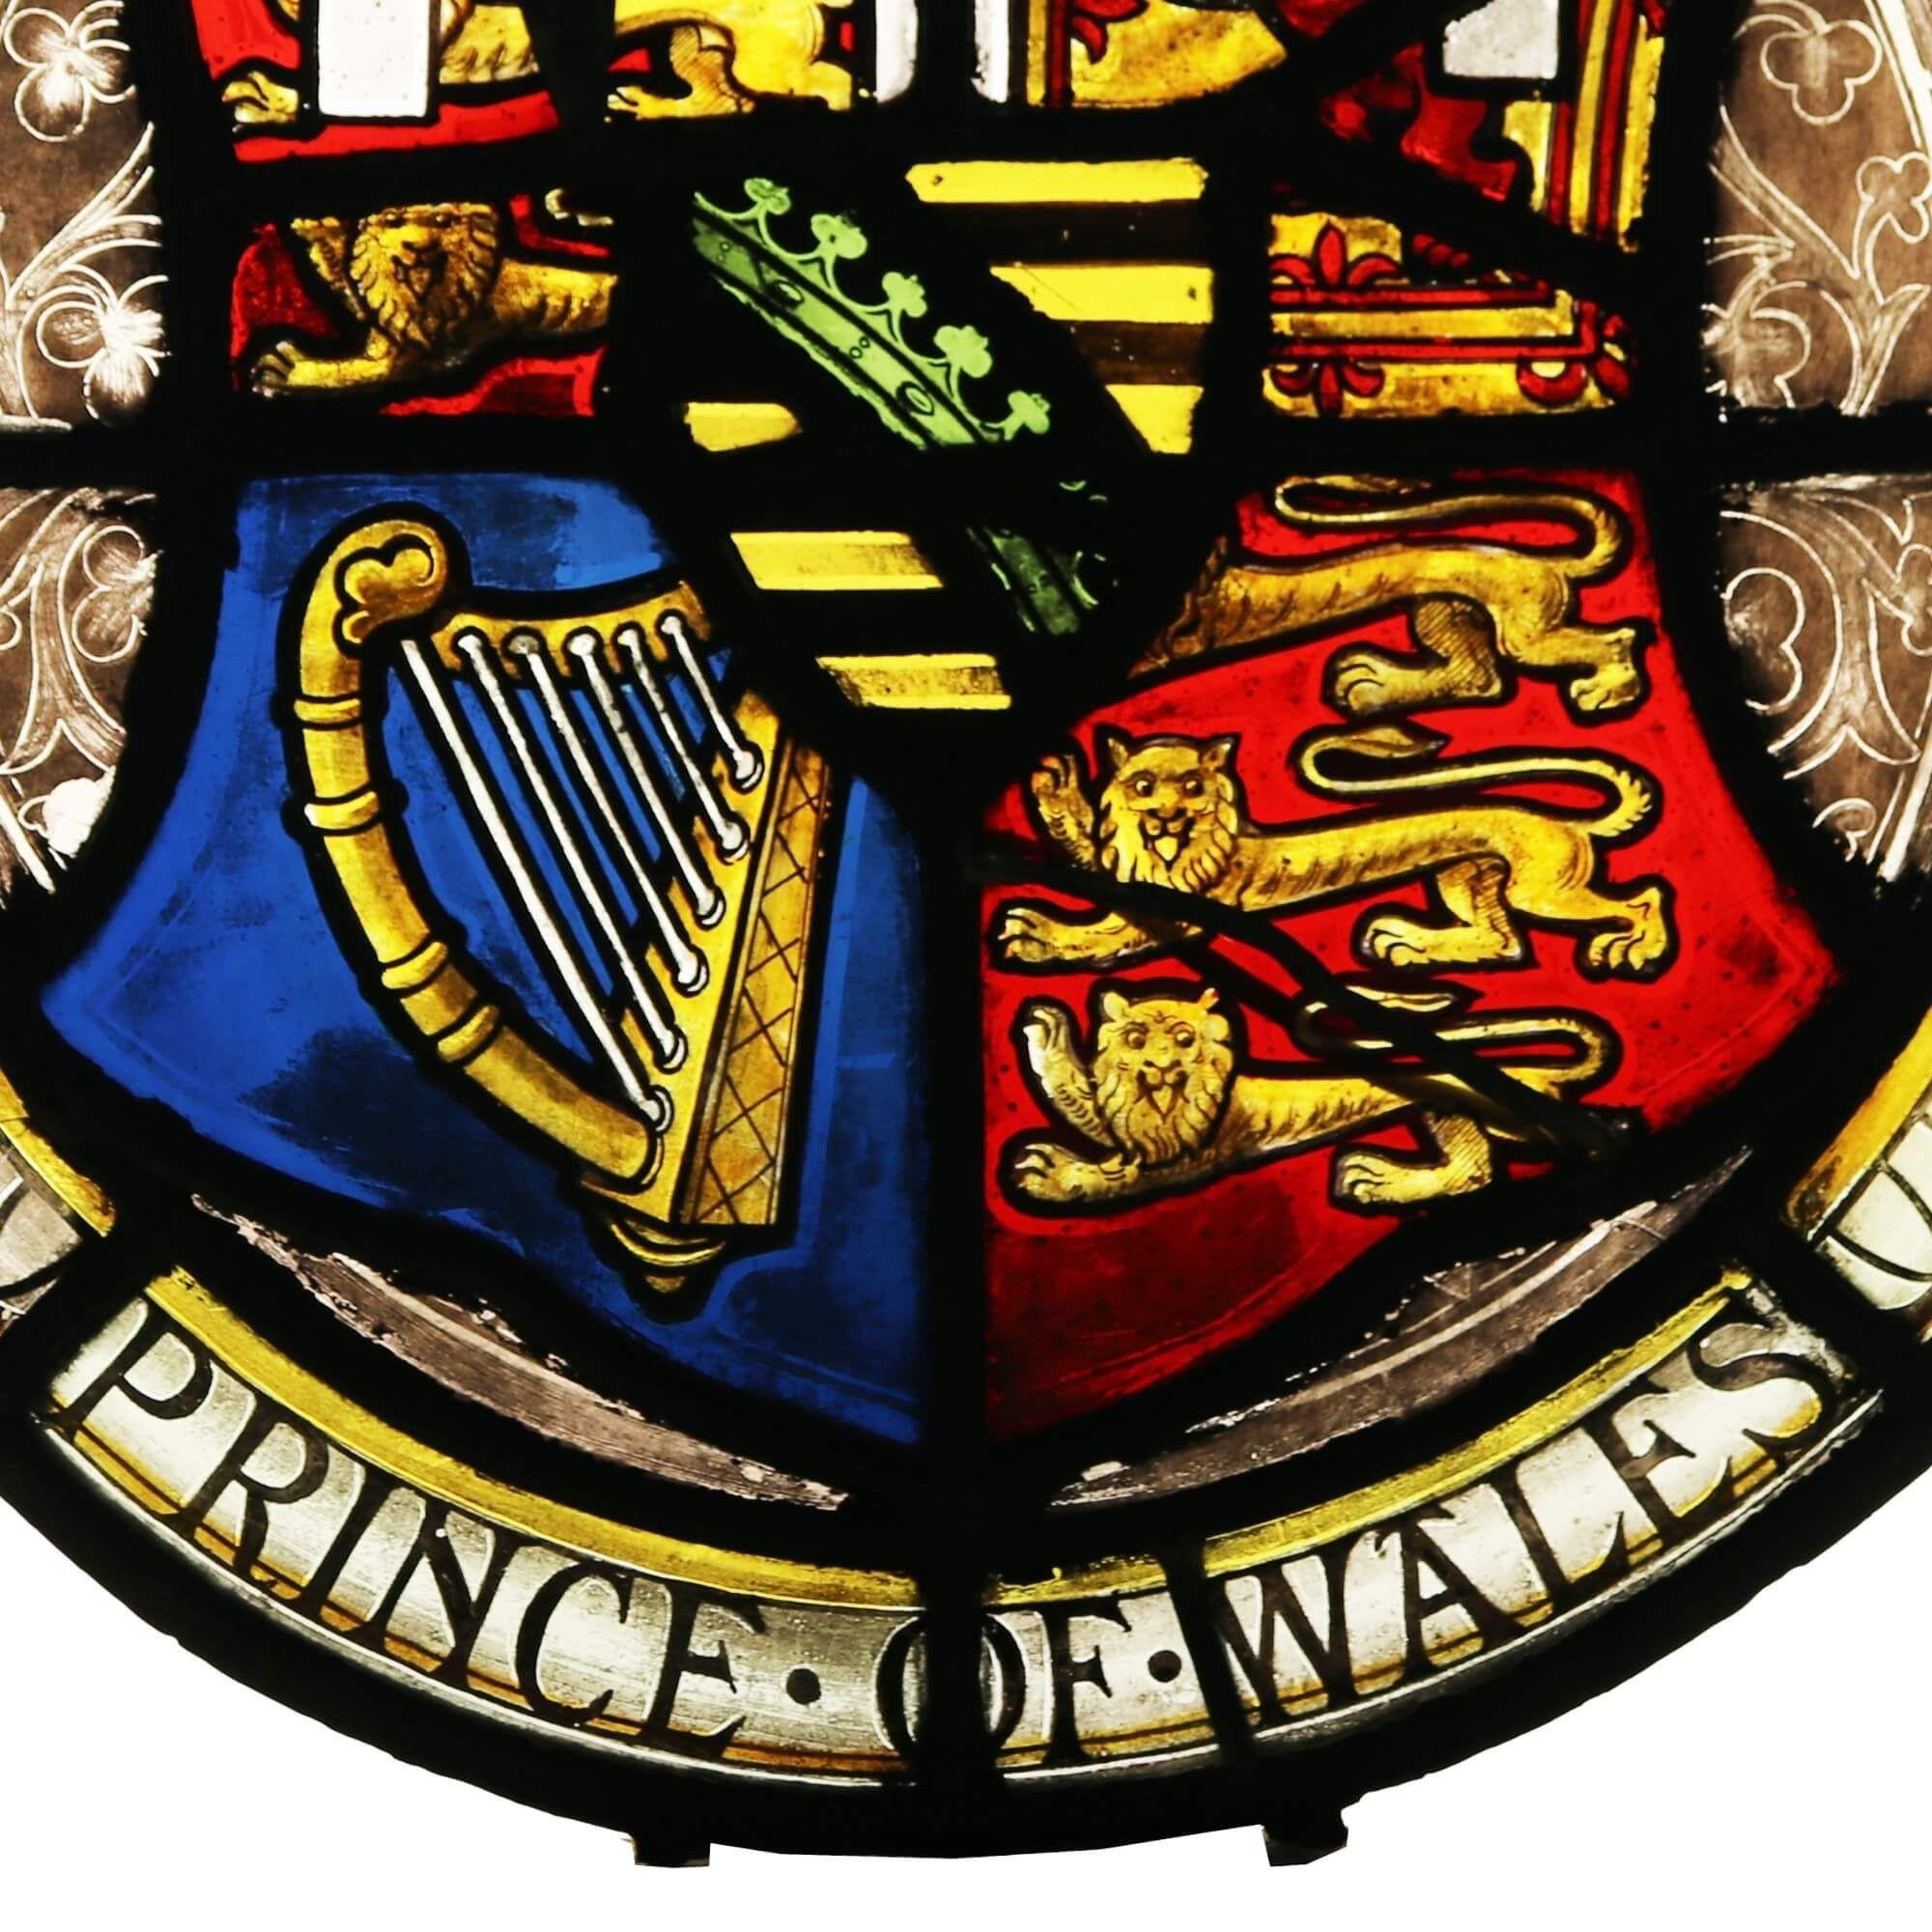 A late 19th century English heraldic stained glass roundel depicting the Coat of Arms of Albert Edward, Prince of Wales (crowned King Edward VII in 1901).

Prior to his coronation as King, HRH was Prince of Wales from 1841-1901. This small leaded